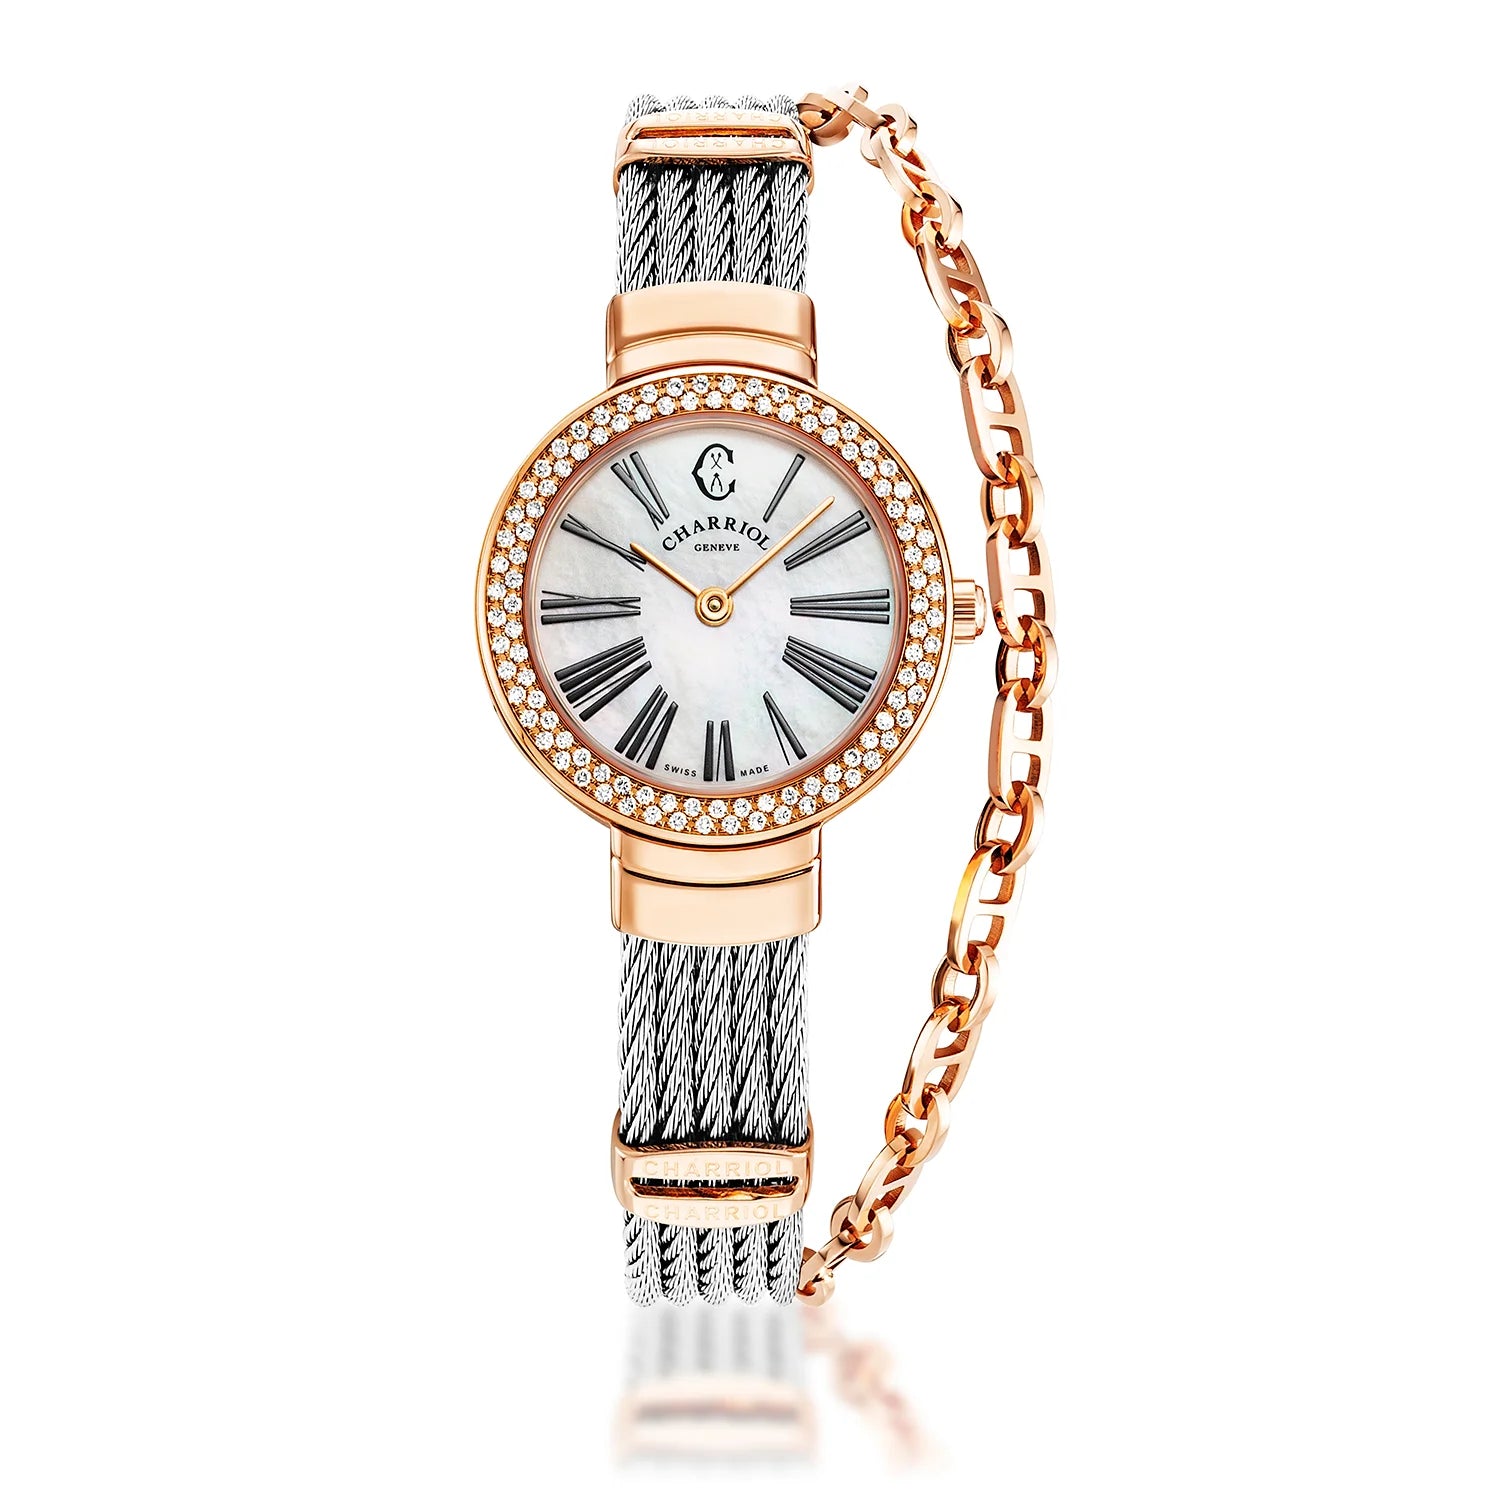 ST TROPEZ, 25MM, QUARTZ CALIBRE, WHITE MOTHER-OF-PEARL WITH ROMAN NUMERALS DIAL, ROSE GOLD PVD WITH 104 DIAMONDS BEZEL, STEEL CABLE BRACELET - Charriol Geneve -  Watch